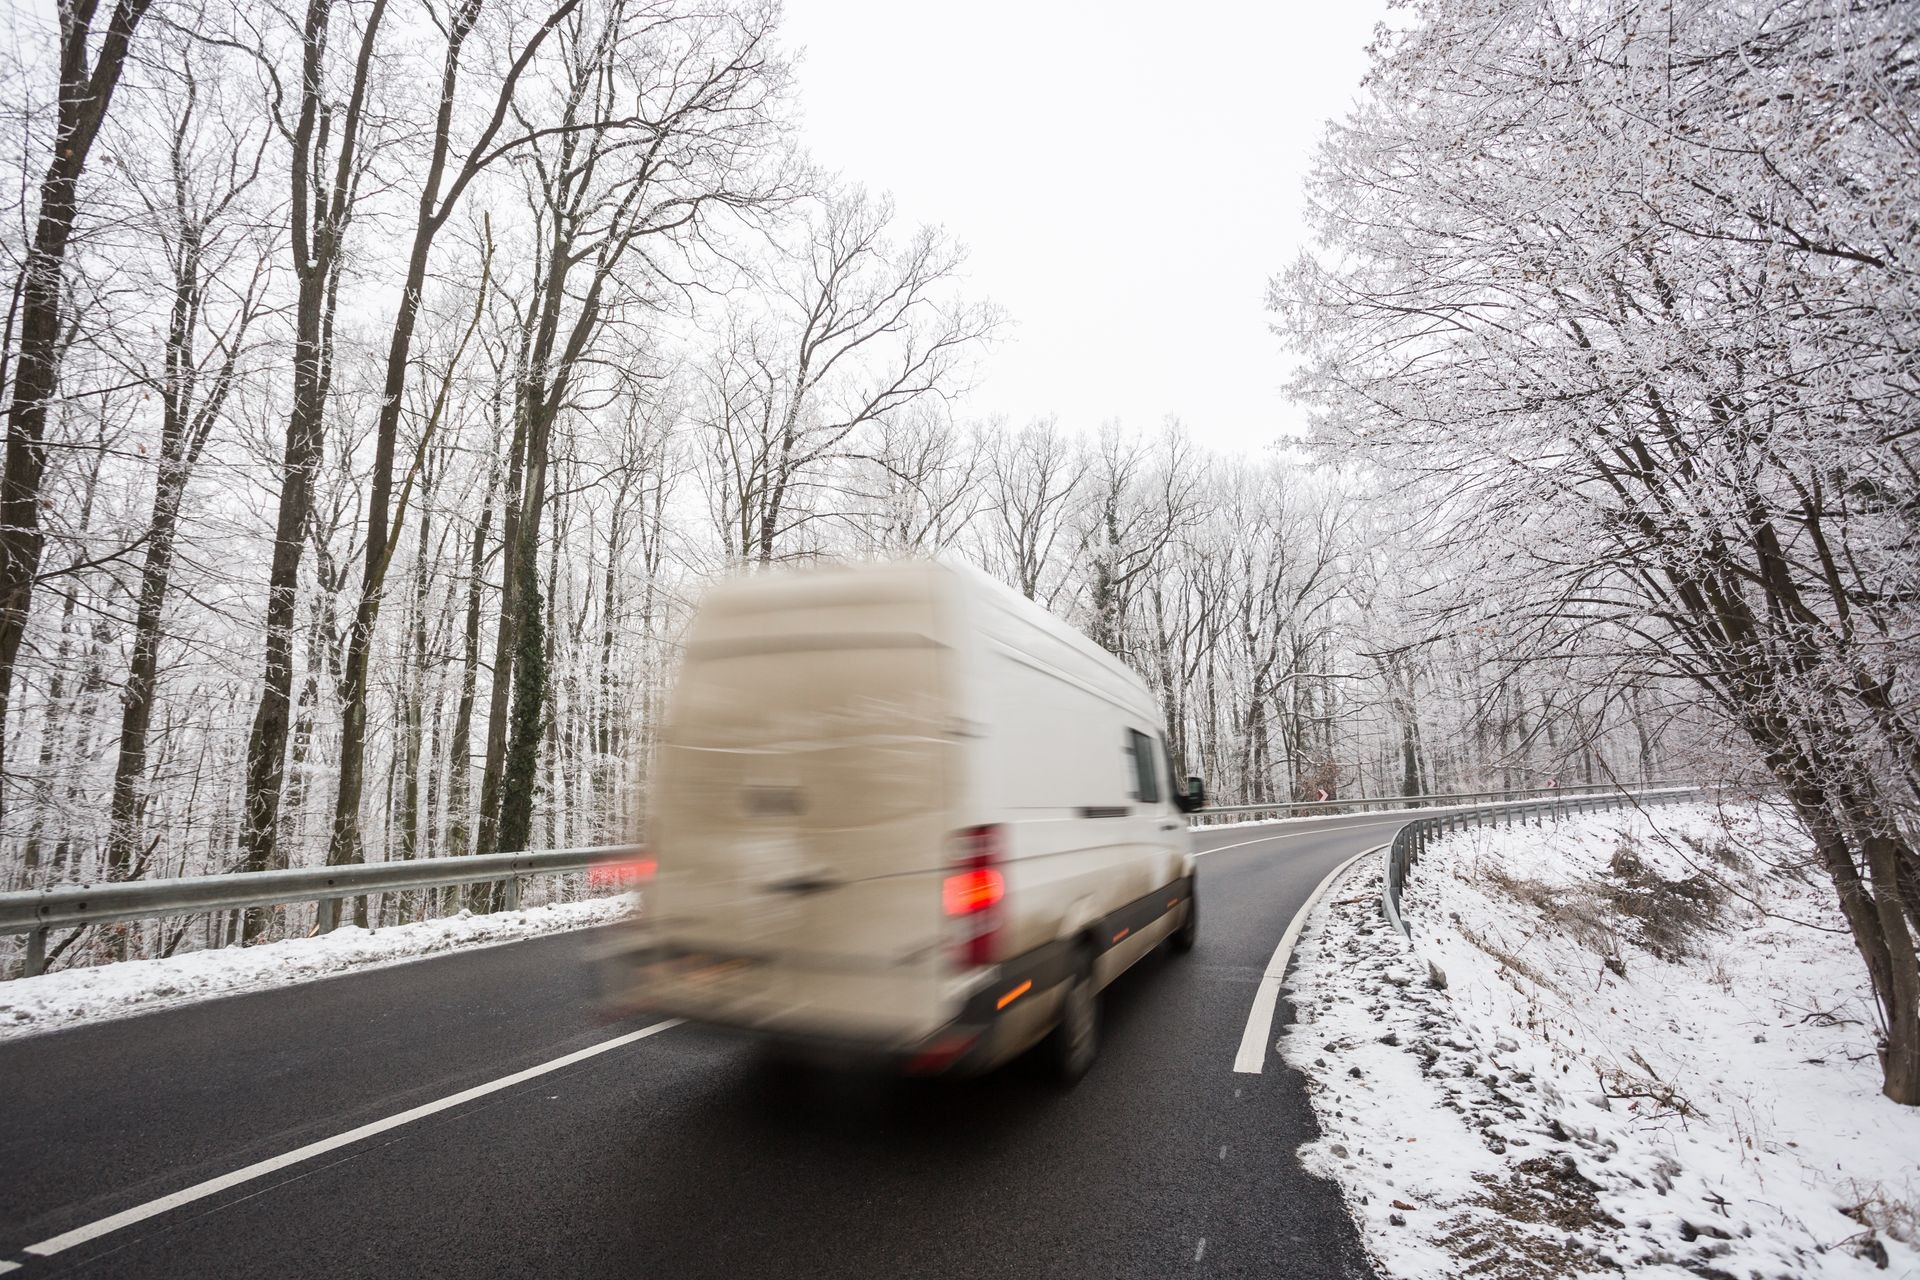 snowy road at cold wintertime with fast van